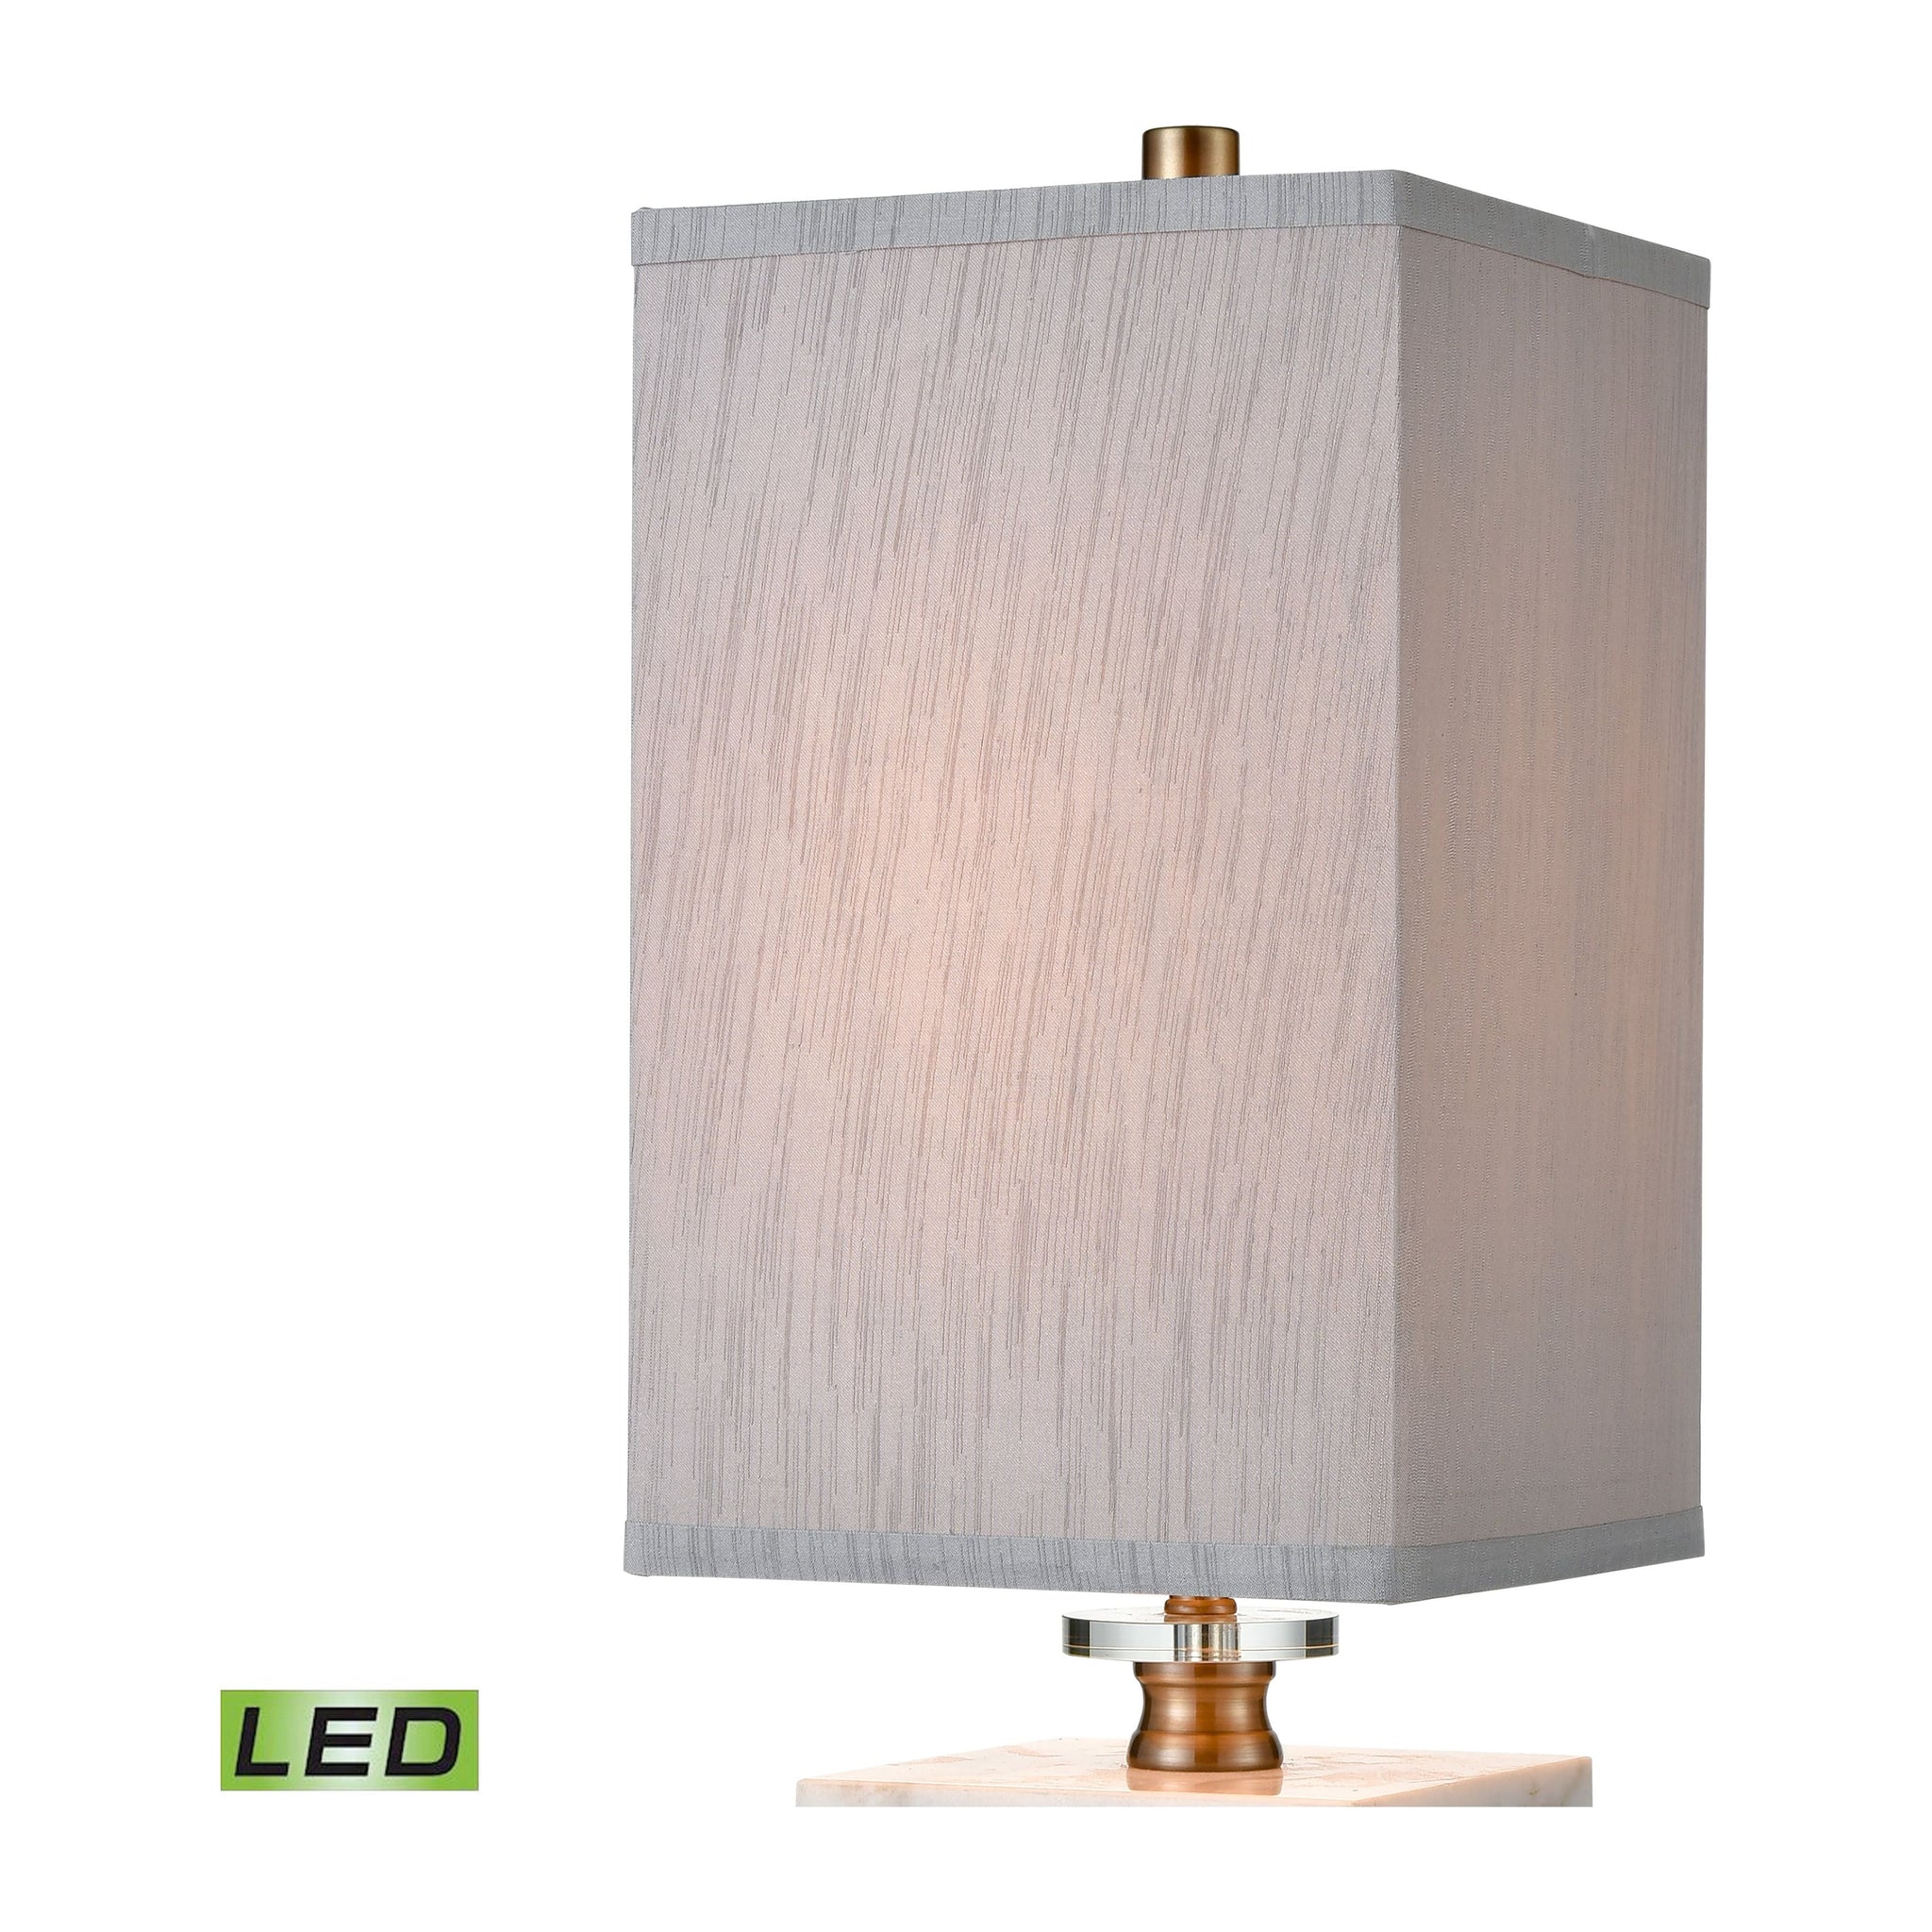 Stand 24" High 1-Light Table Lamp